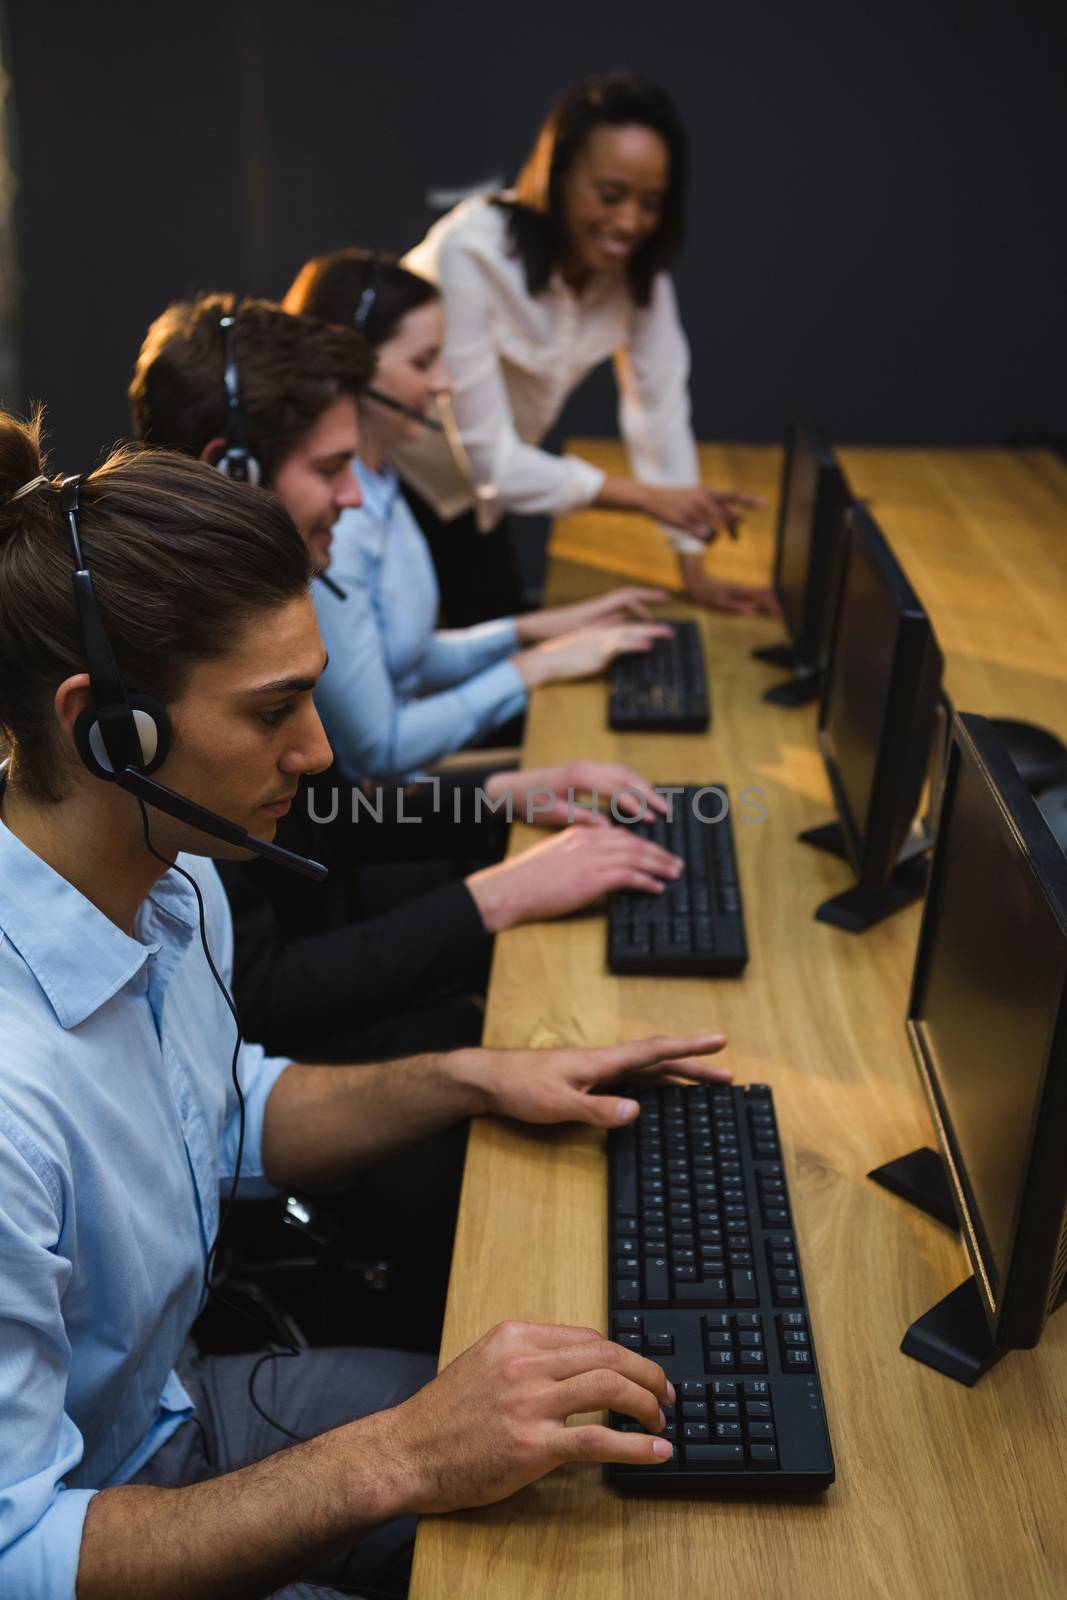 Business executives with headsets using computers at desk in office